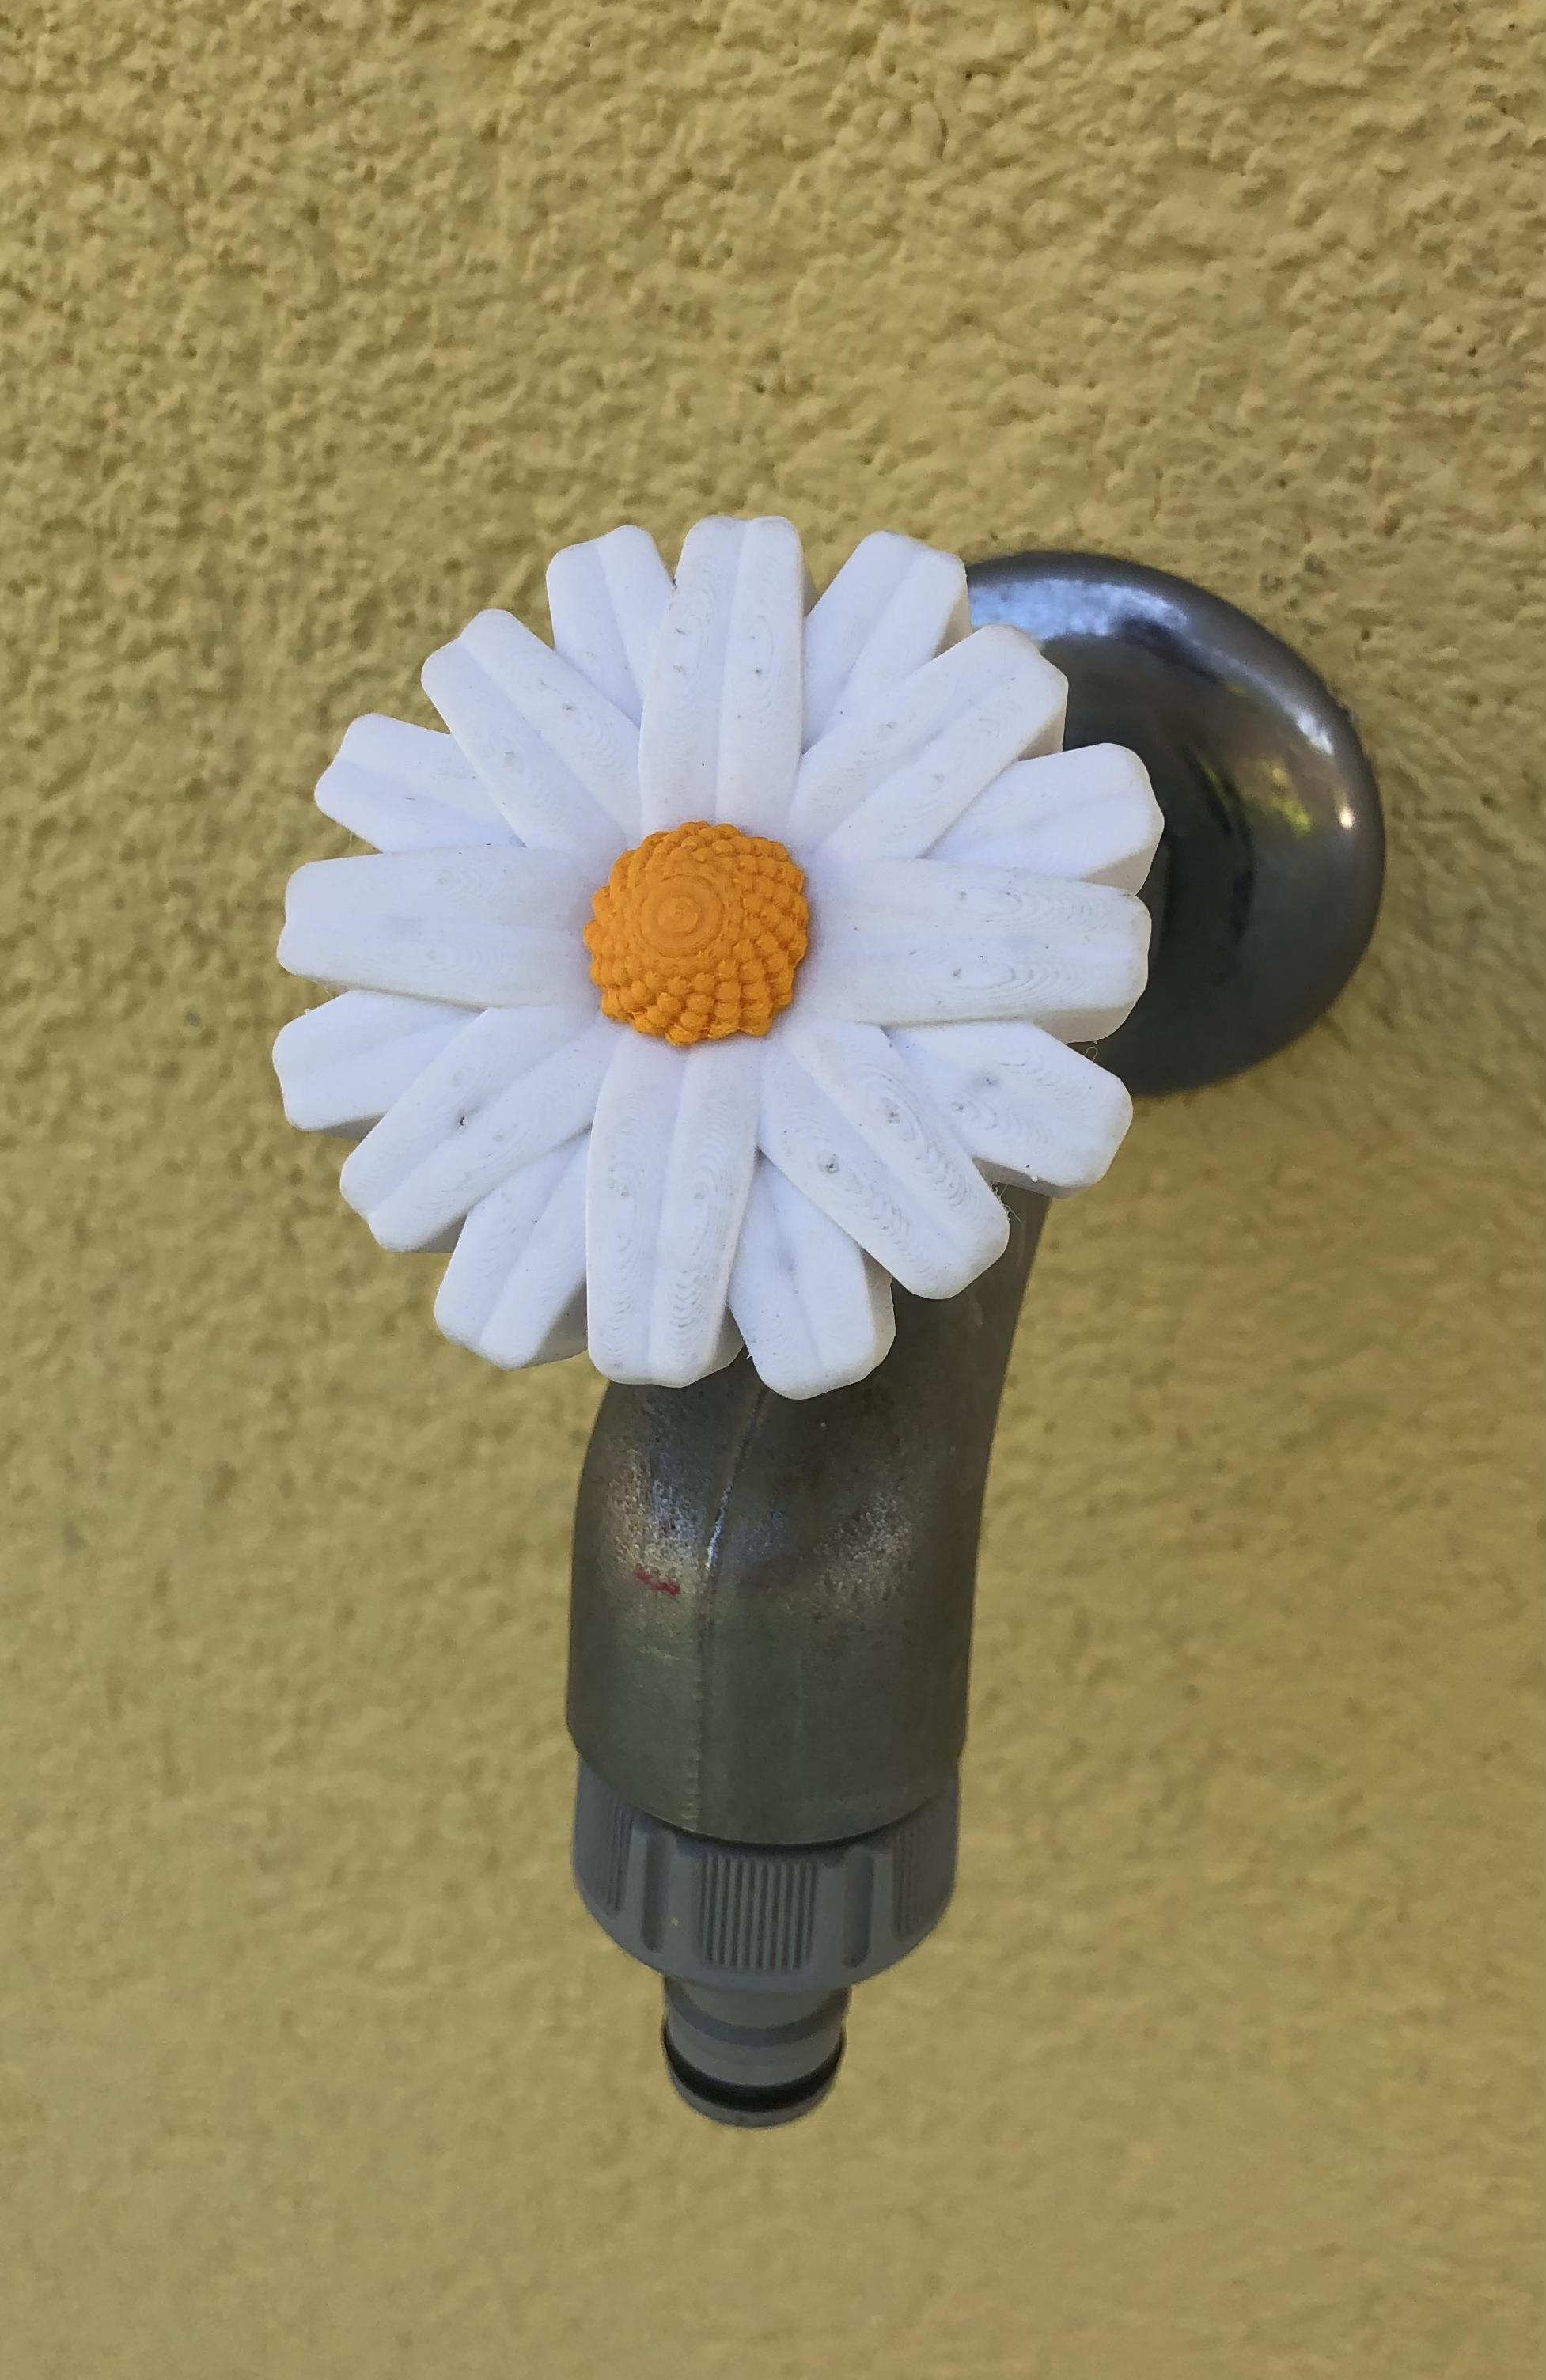 Daisy Outdoor Water Tap Handle